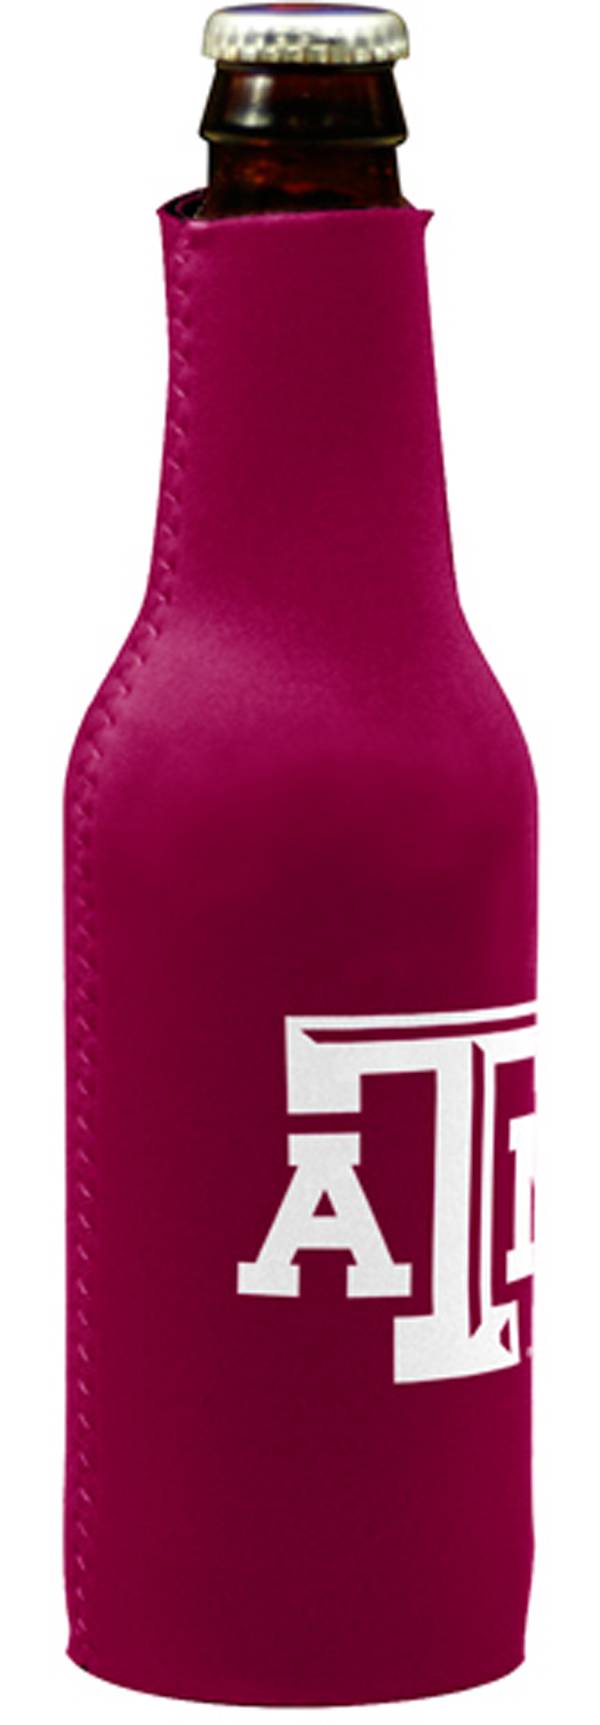 Logo Brands Texas A&M Aggies Bottle Koozie product image